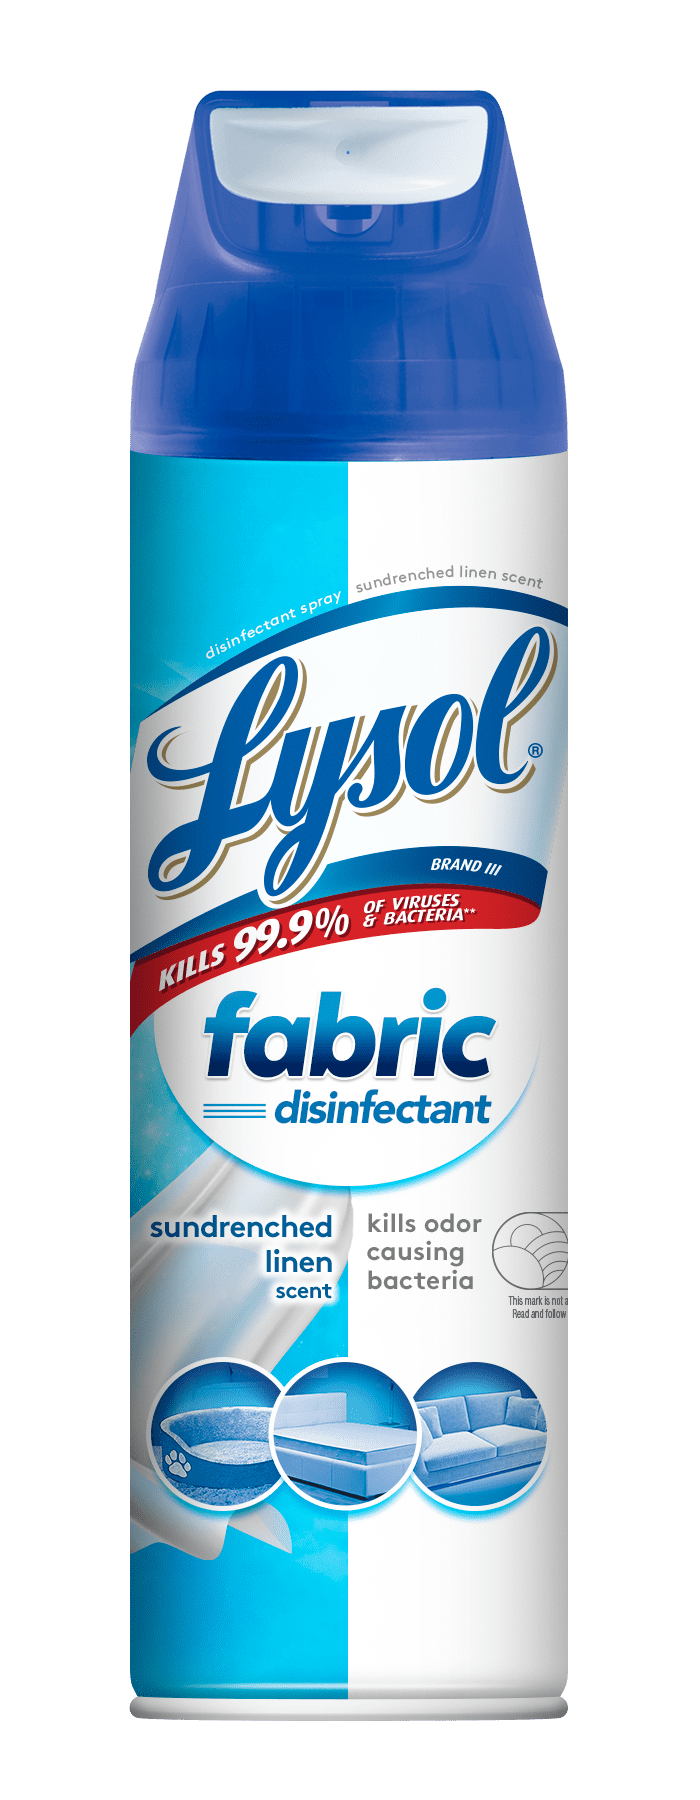 Lysol Fabric Disinfectant Spray, Sanitizing and Antibacterial Spray, For Disinfecting and Deodorizing Soft Furnishings, Sundrenched Linen 15 FL. Oz